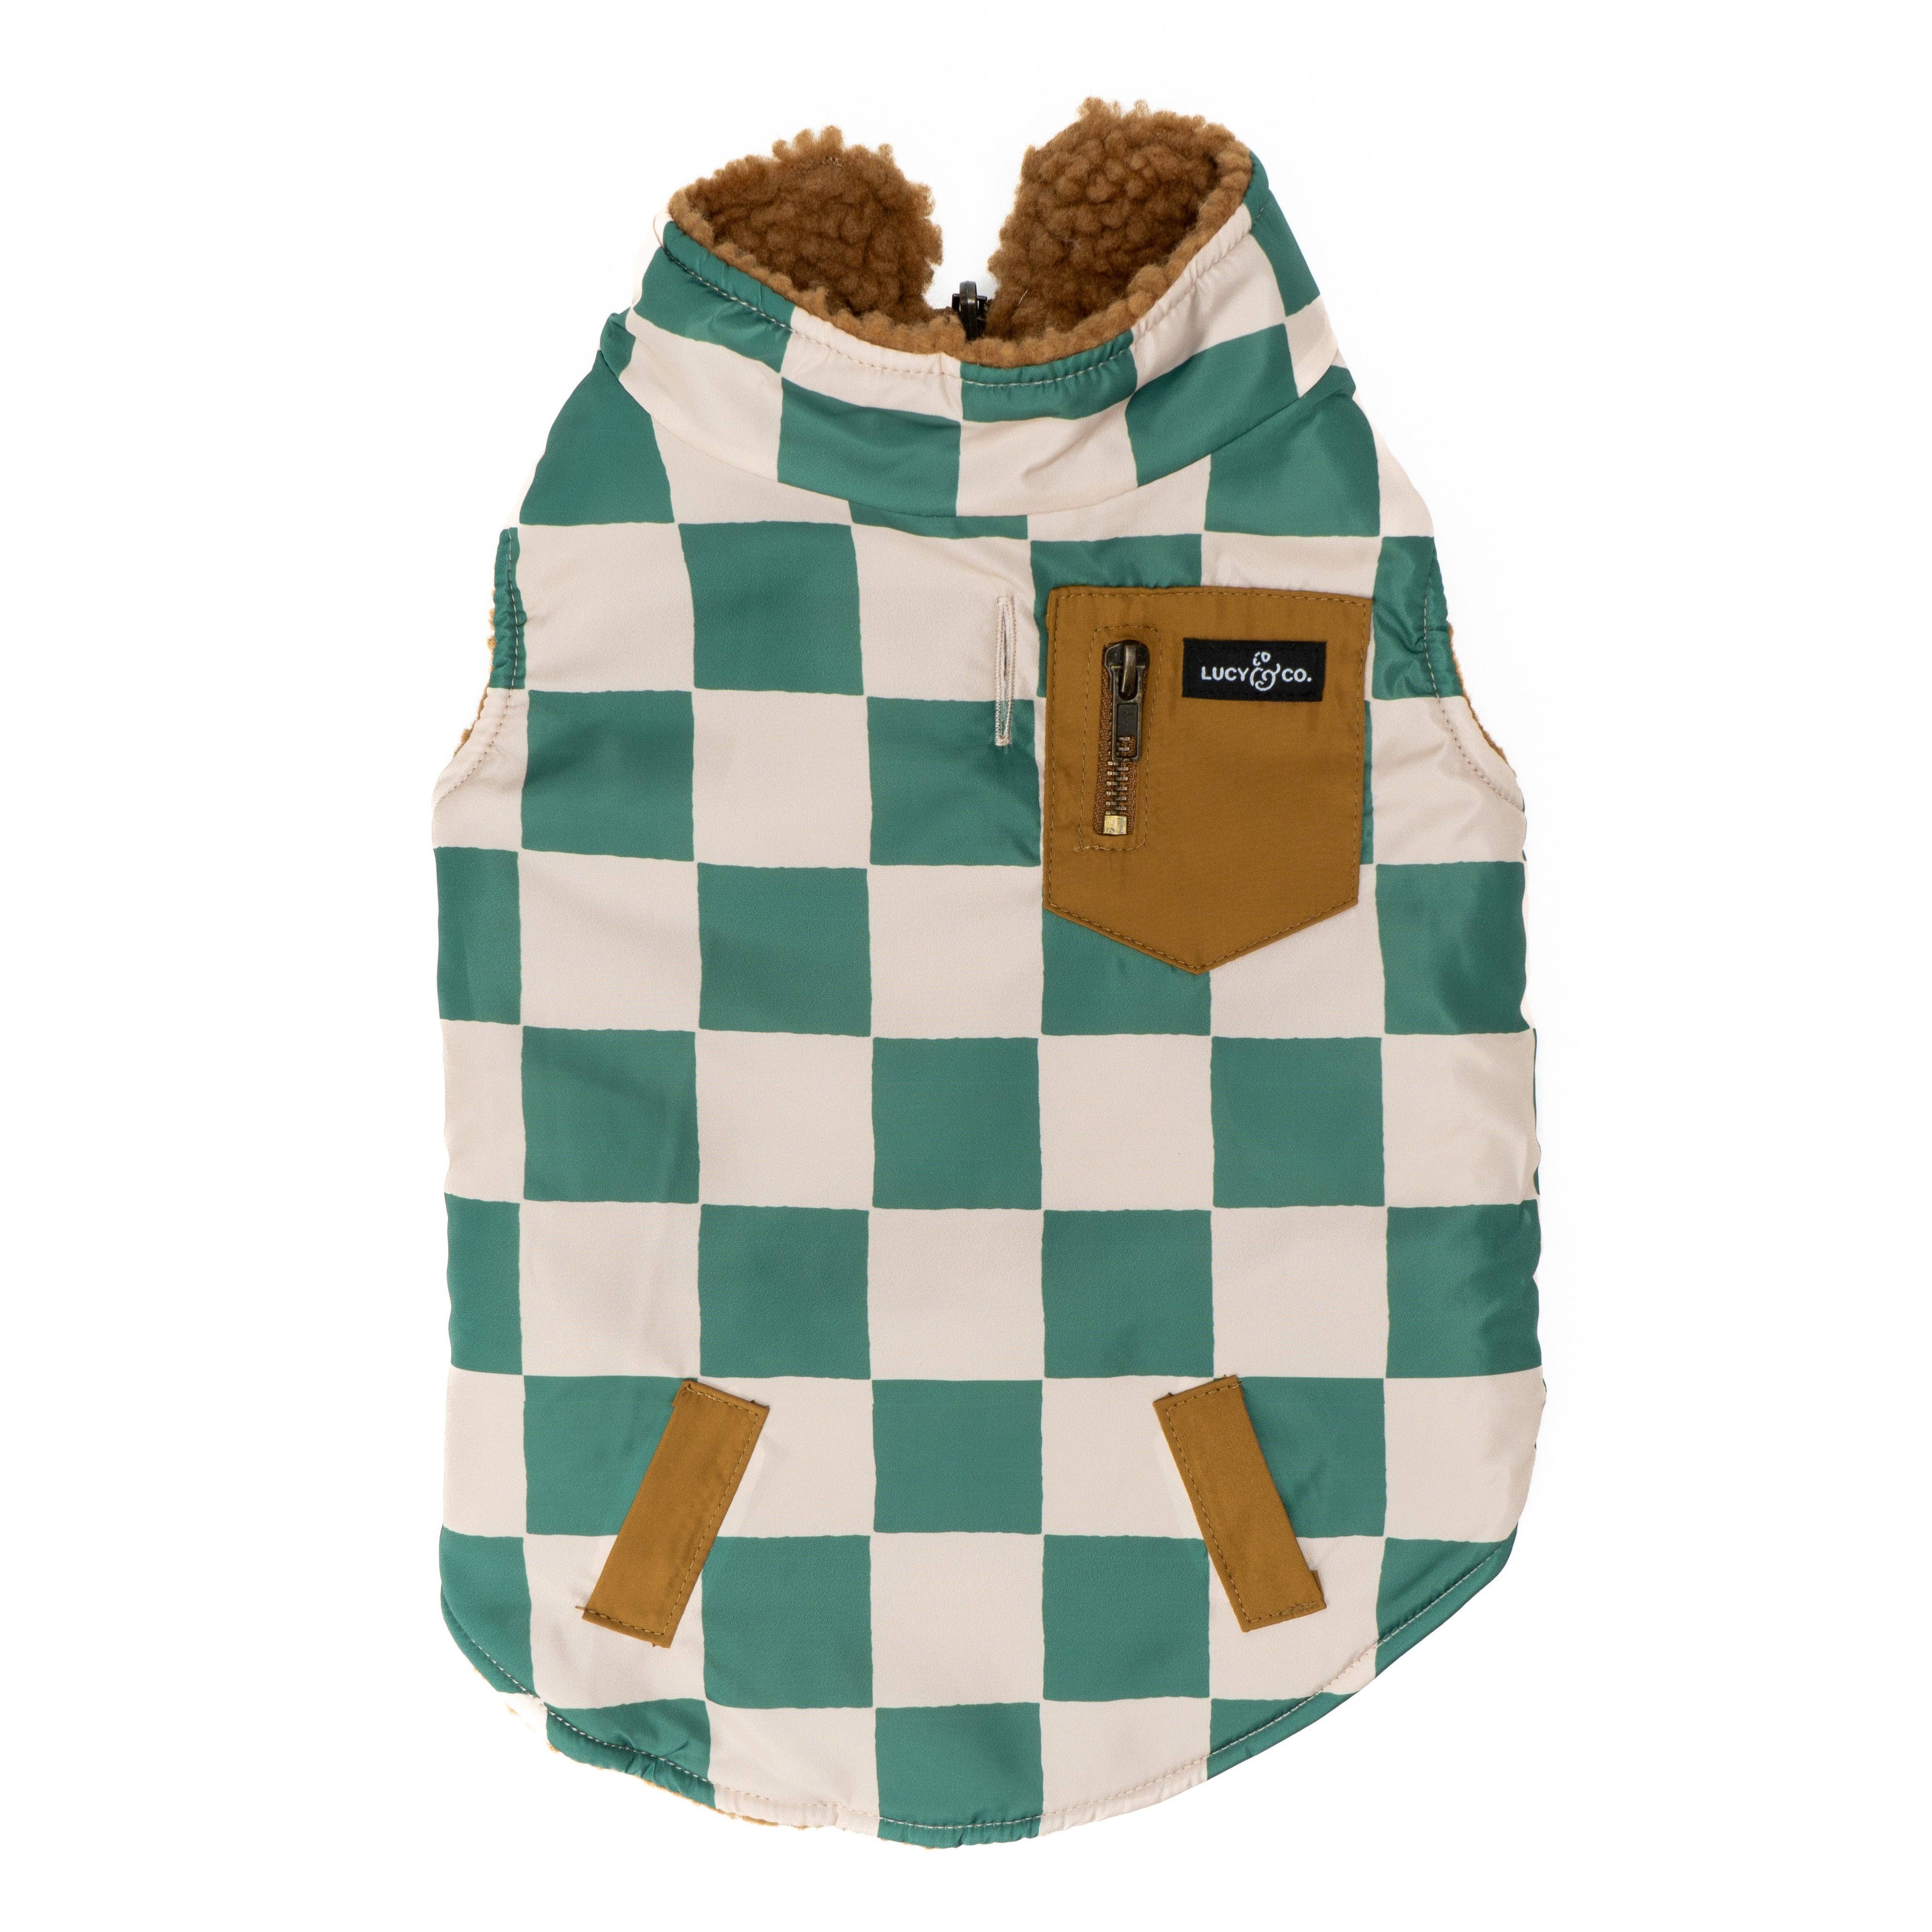 The You're a Square Reversible Teddy Vest: Large